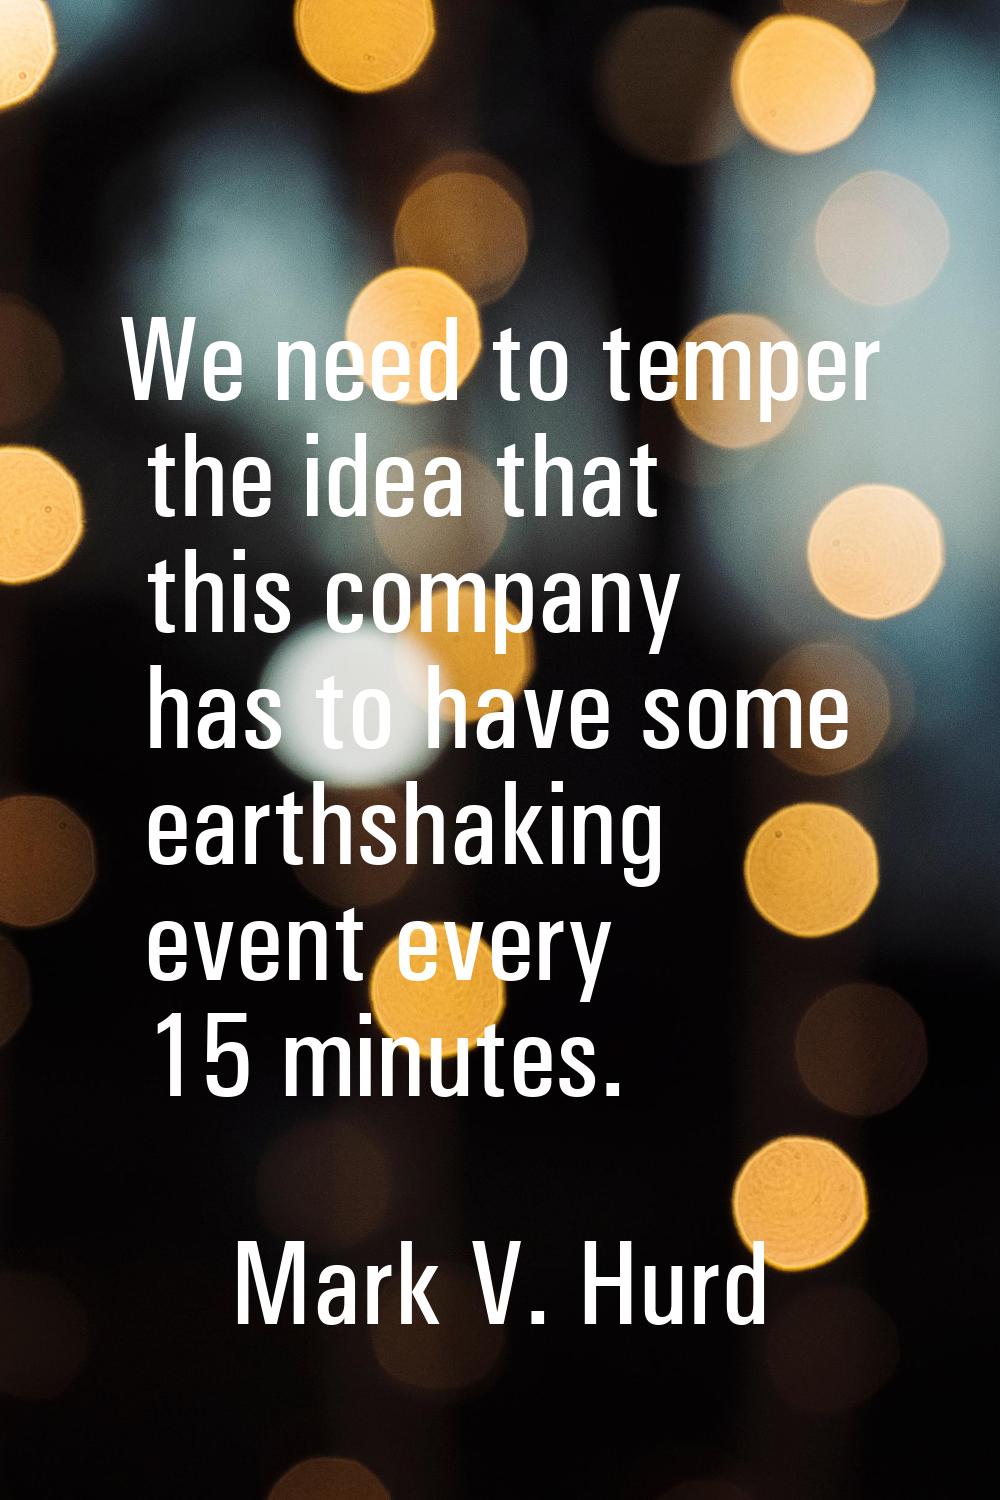 We need to temper the idea that this company has to have some earthshaking event every 15 minutes.